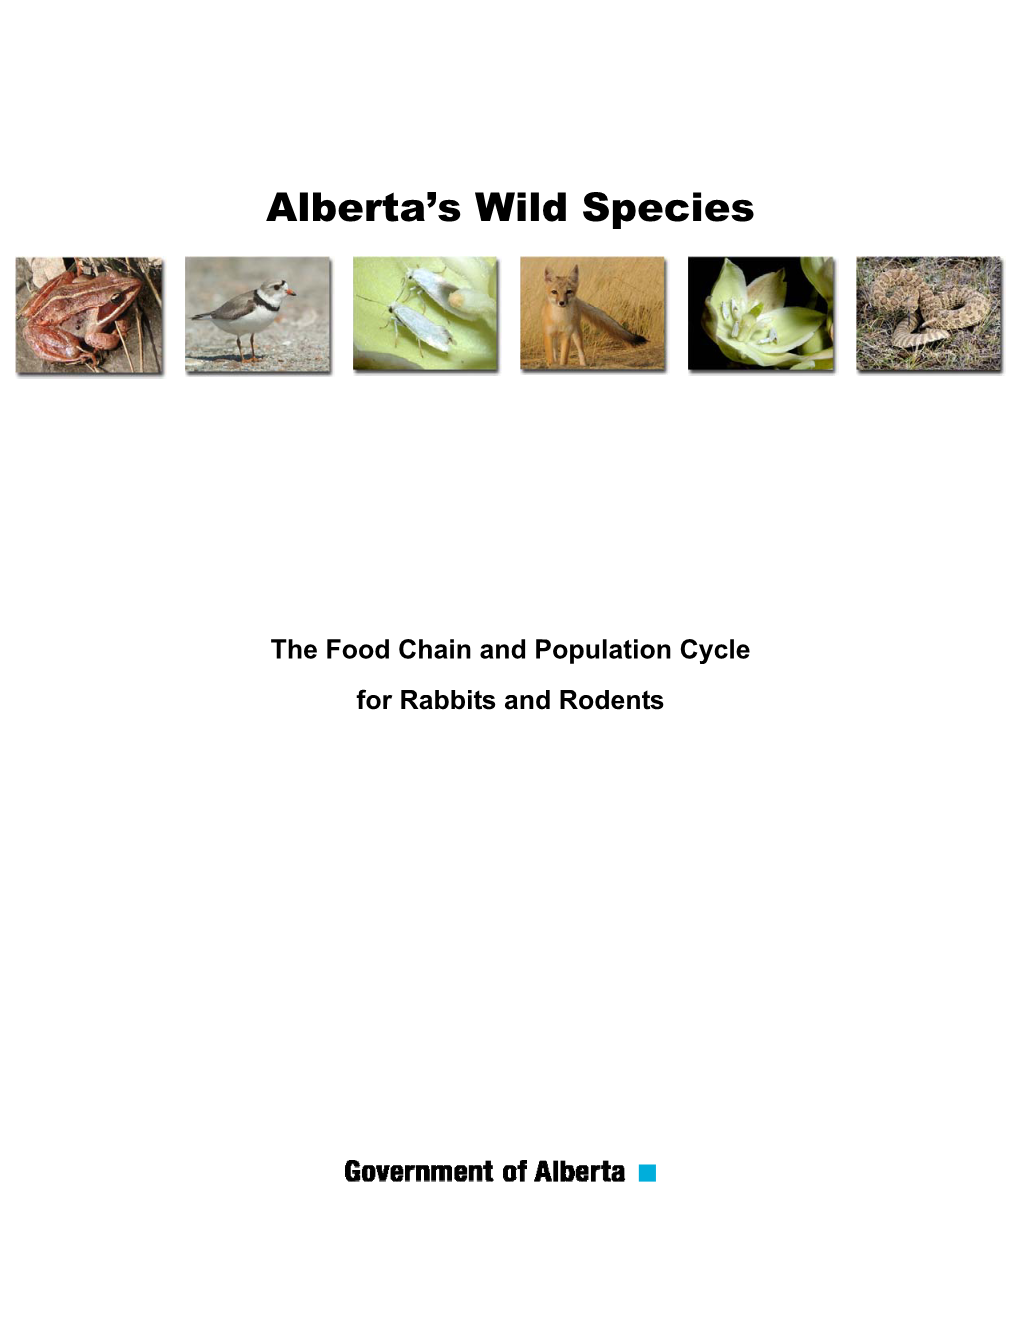 The Food Chain and Population Cycle for Rabbits and Rodents